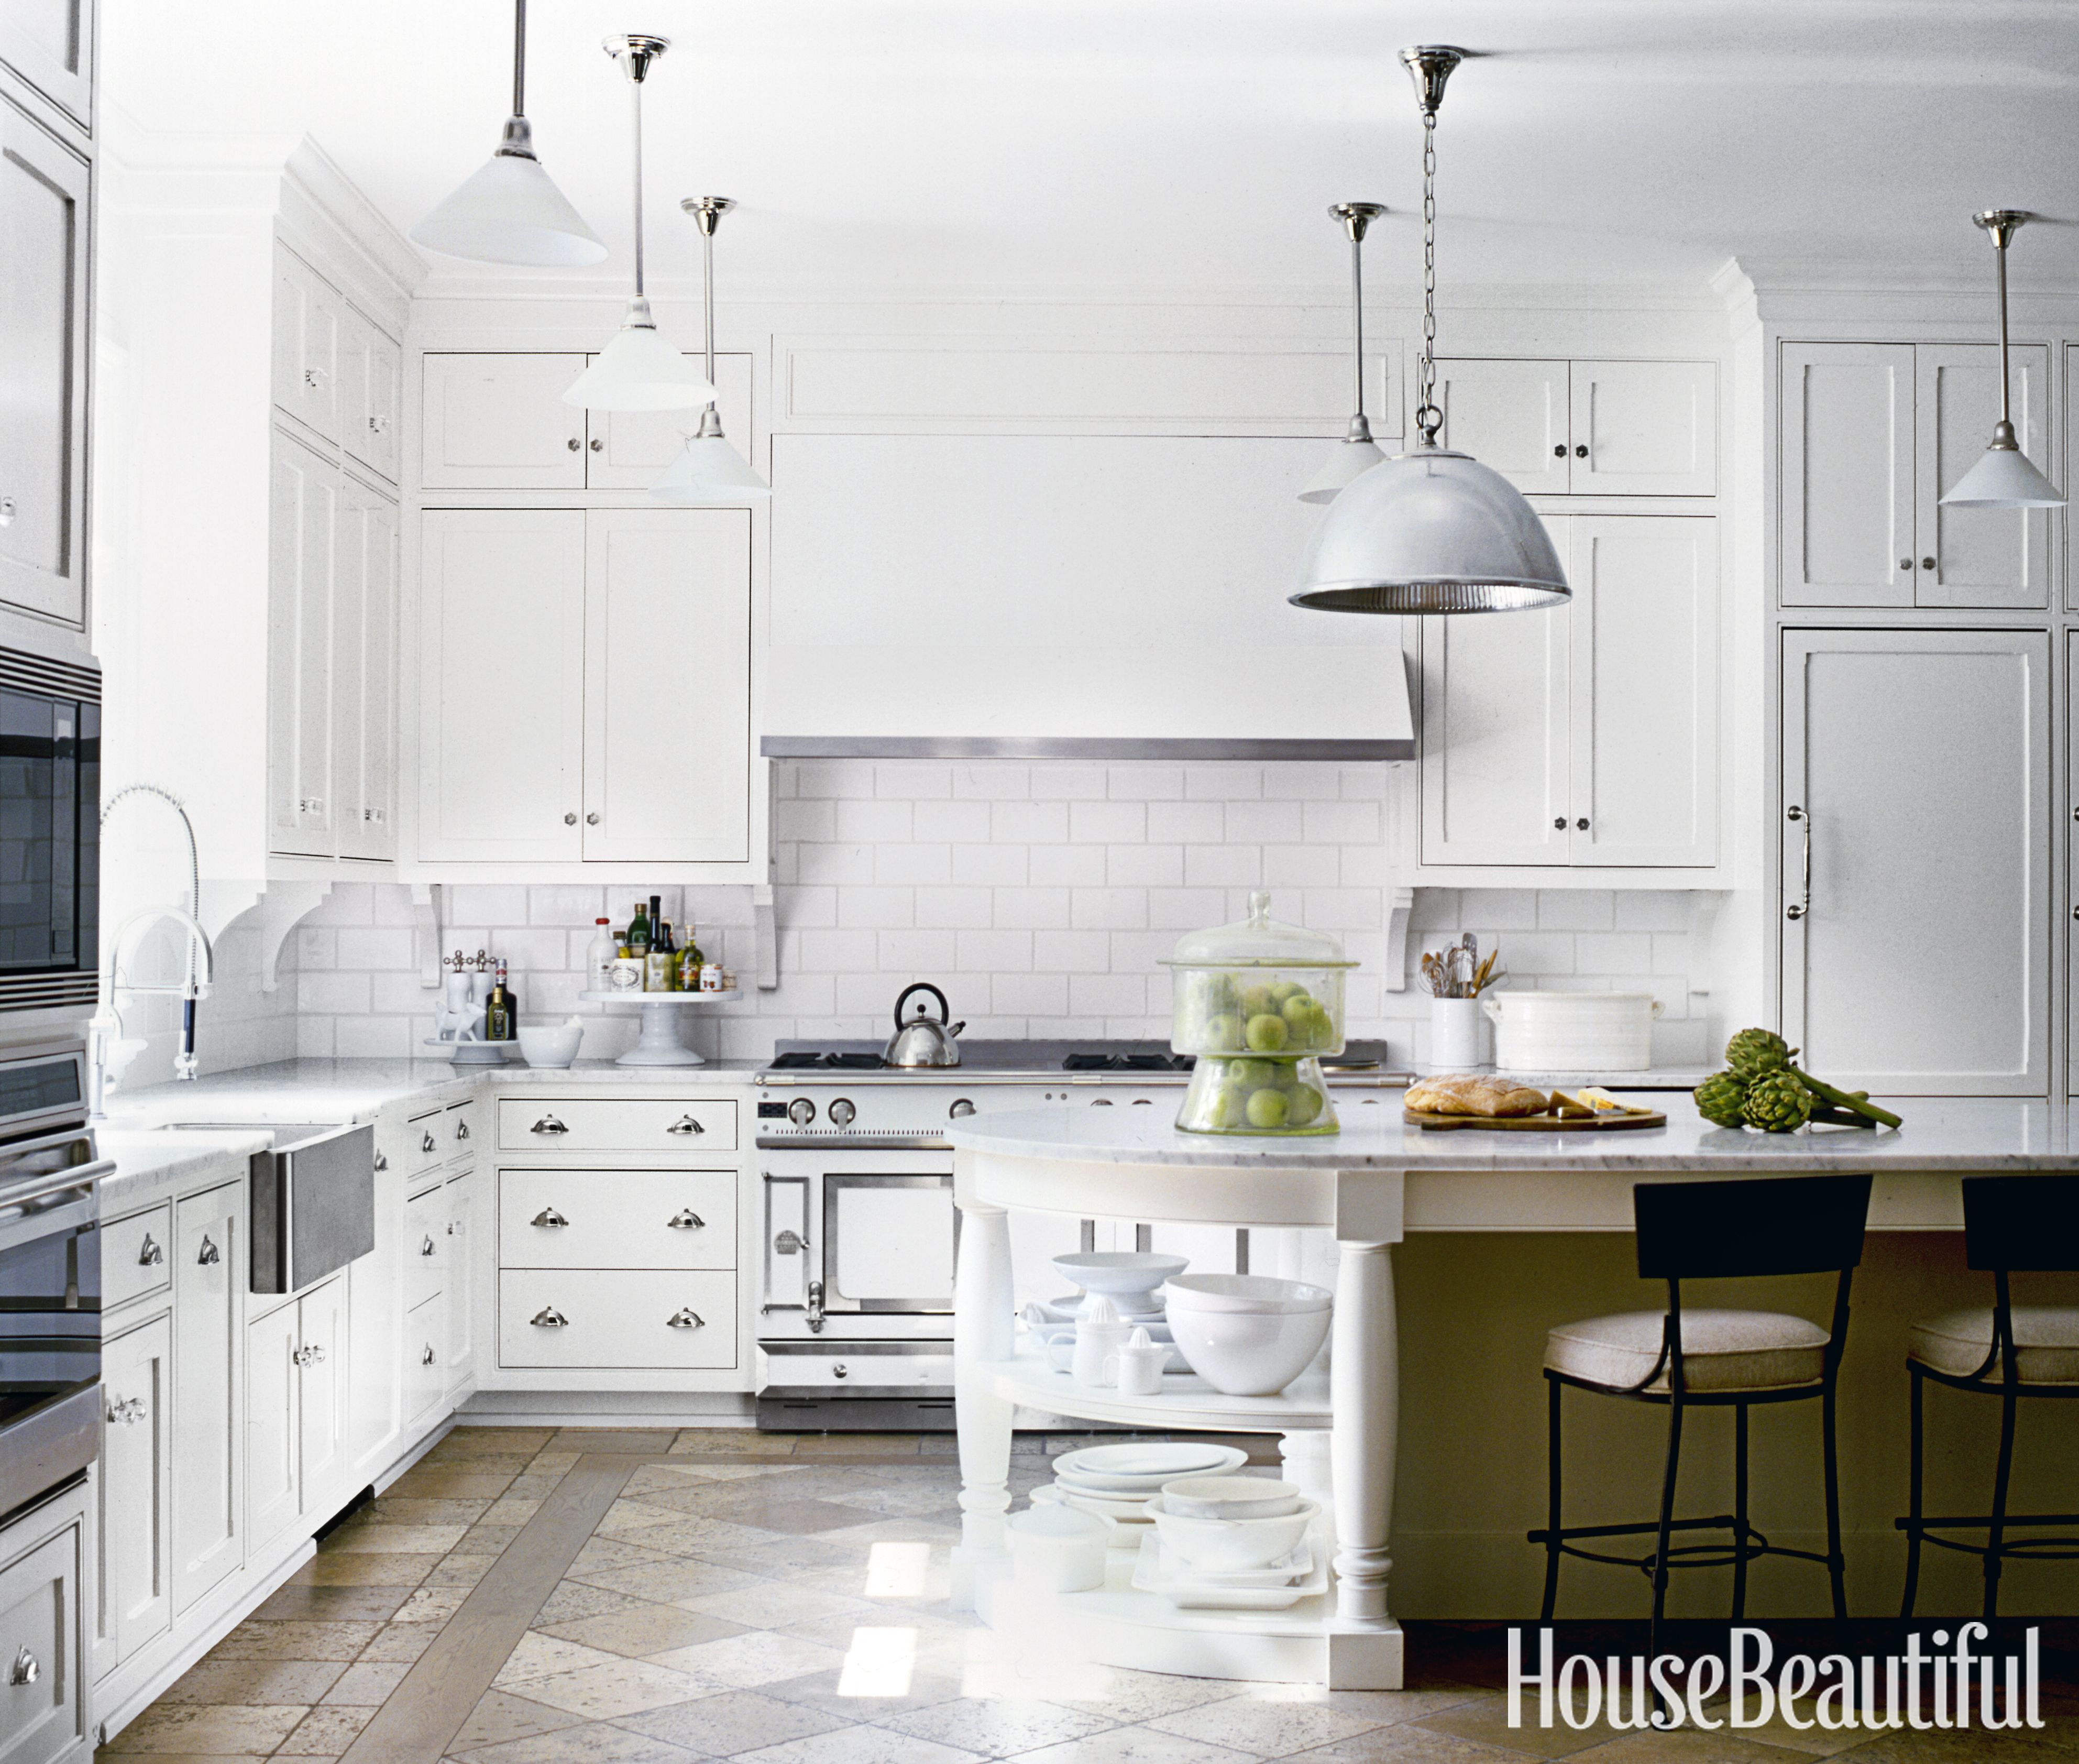 How To Make Your Kitchen Look Expensive, What Are The Most Affordable Kitchen Cabinets